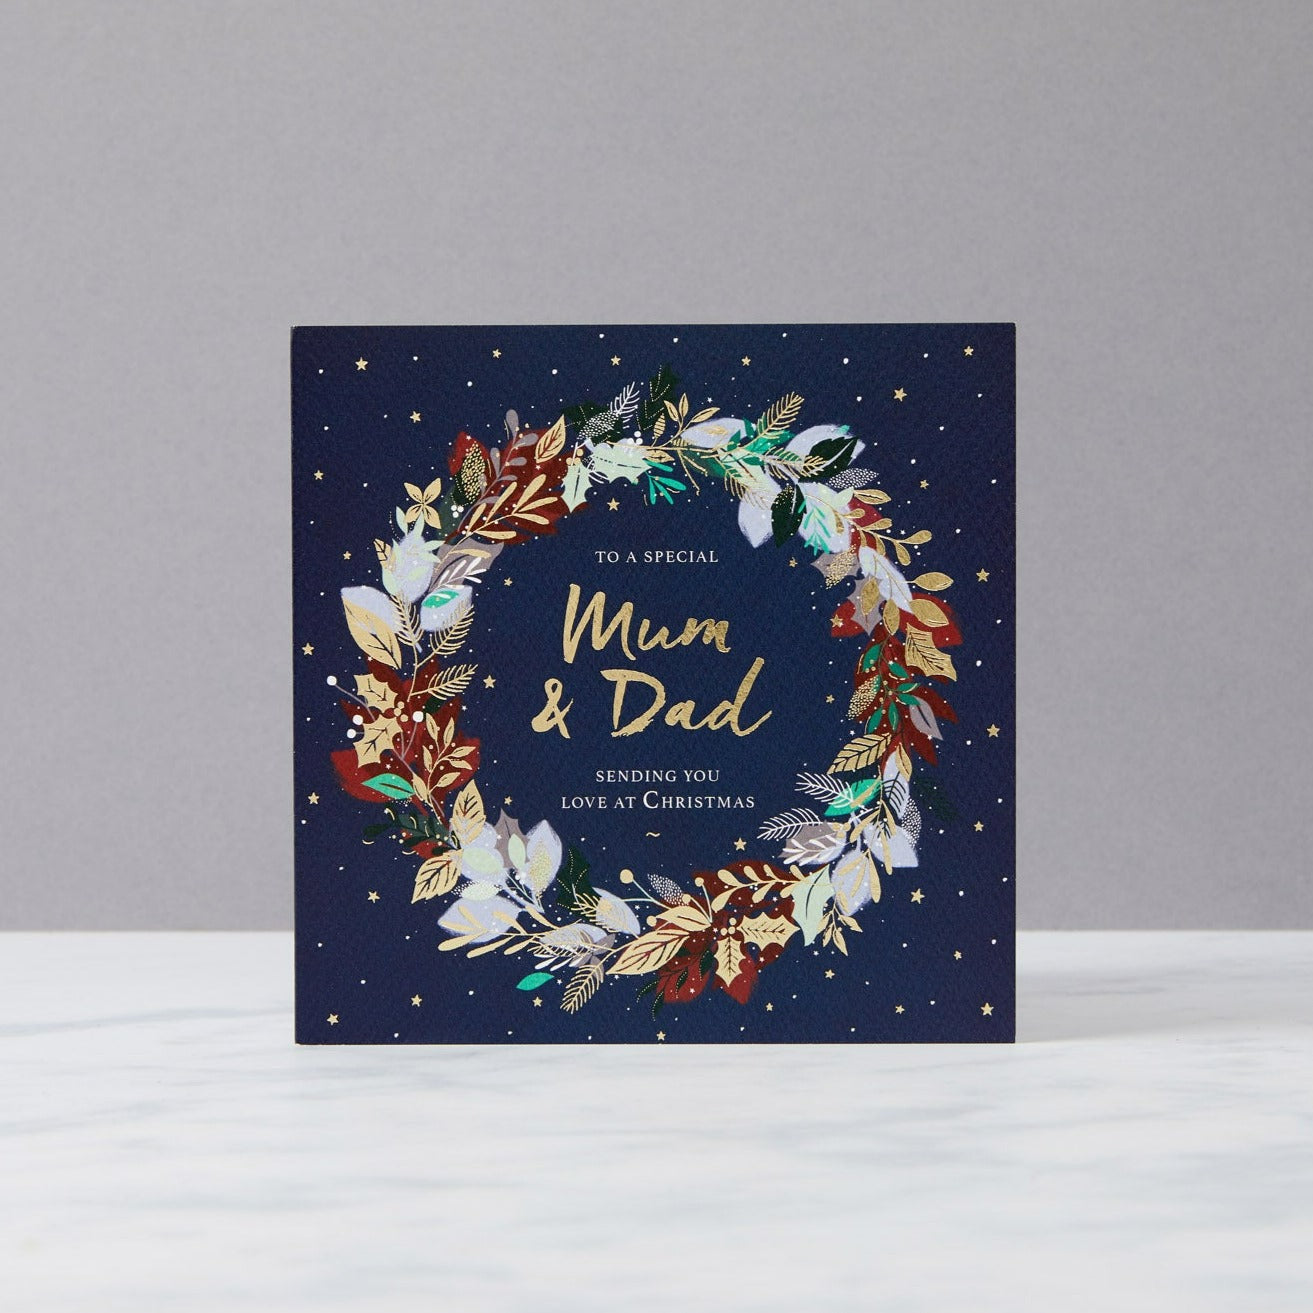 navy card with gold stars and wreath reads "to a special mum & dad sending you love at Christmas" 